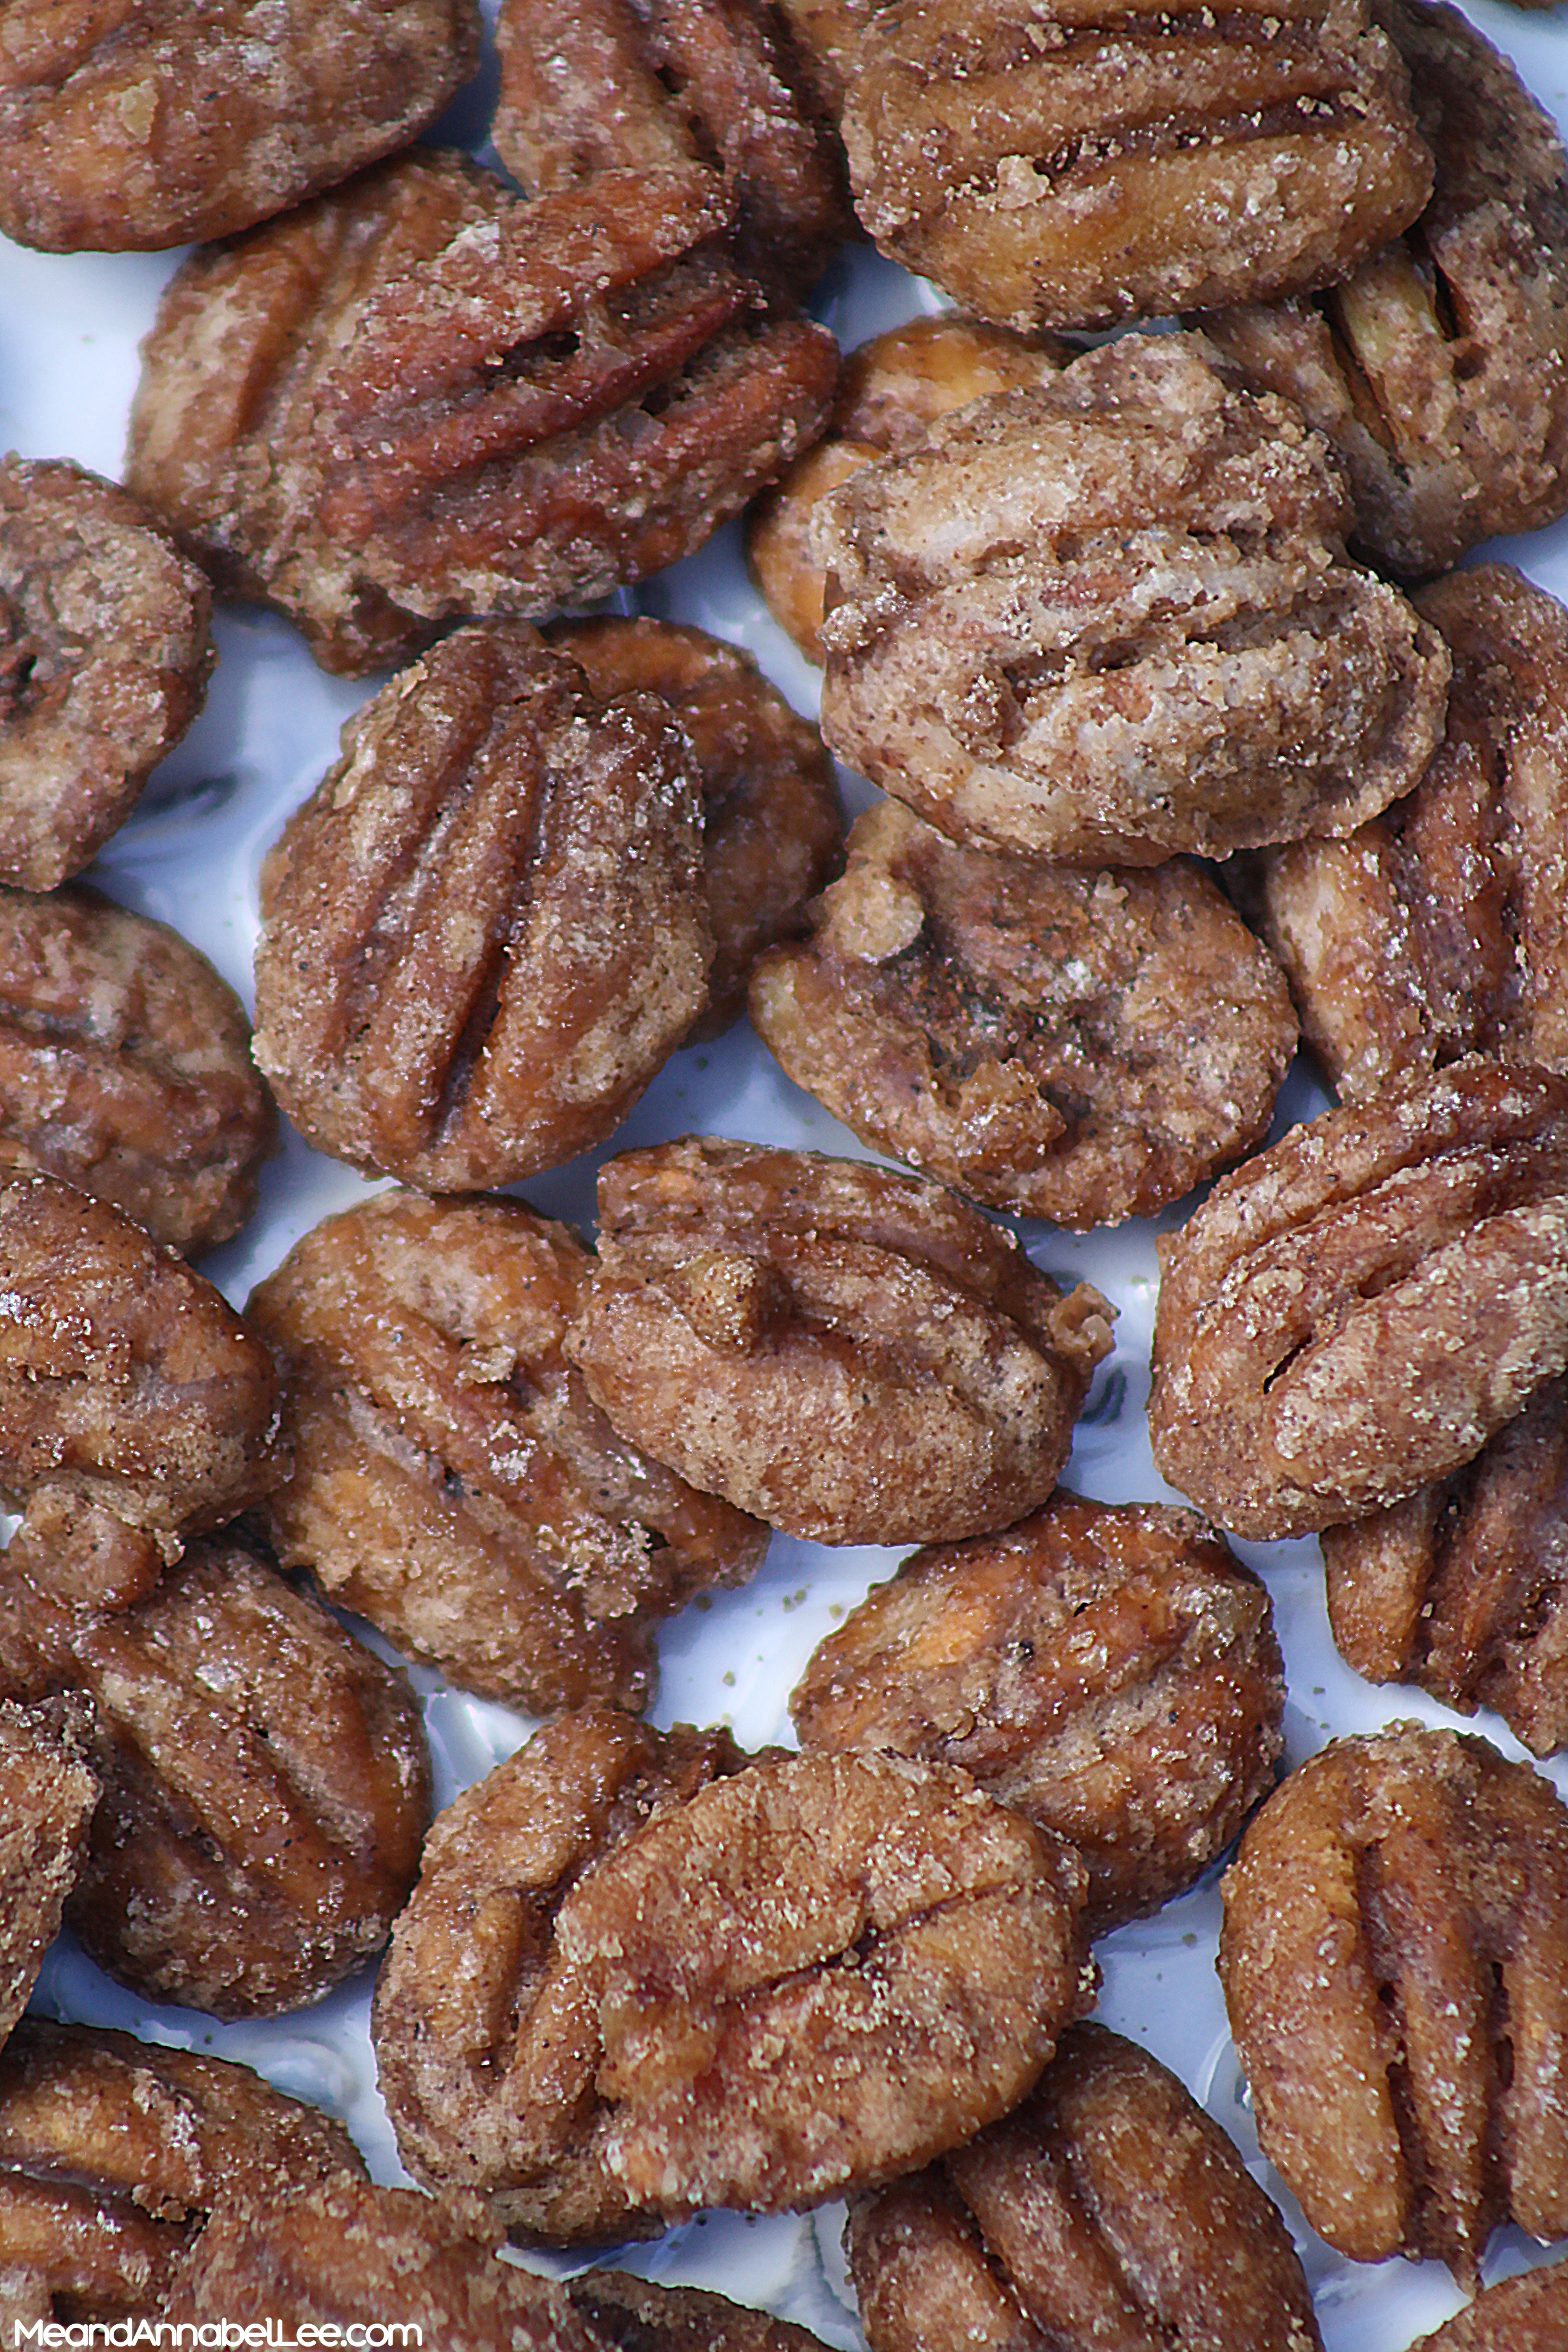 Candied Pecans - Try this simple recipe and you'll never by store-bought again! www.MeandAnnabelLee.com